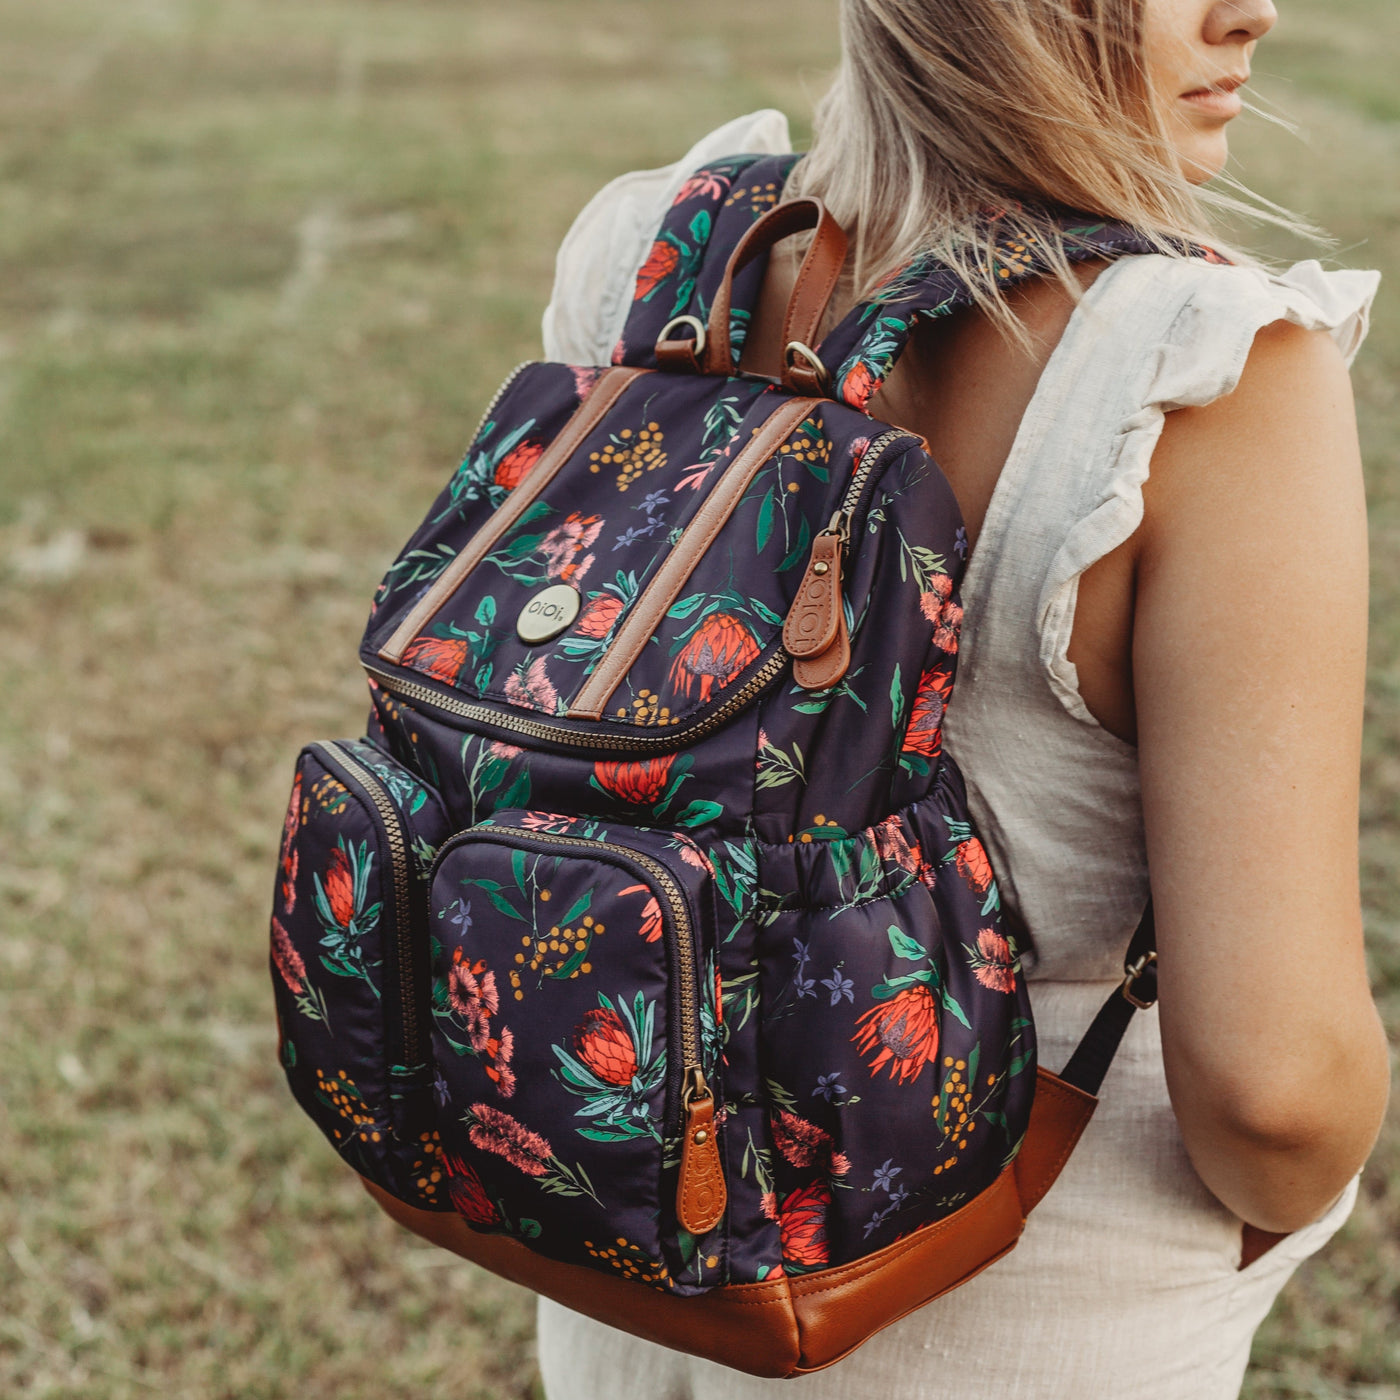 Nappy Backpack - Floral Botanical Backpack OiOi 